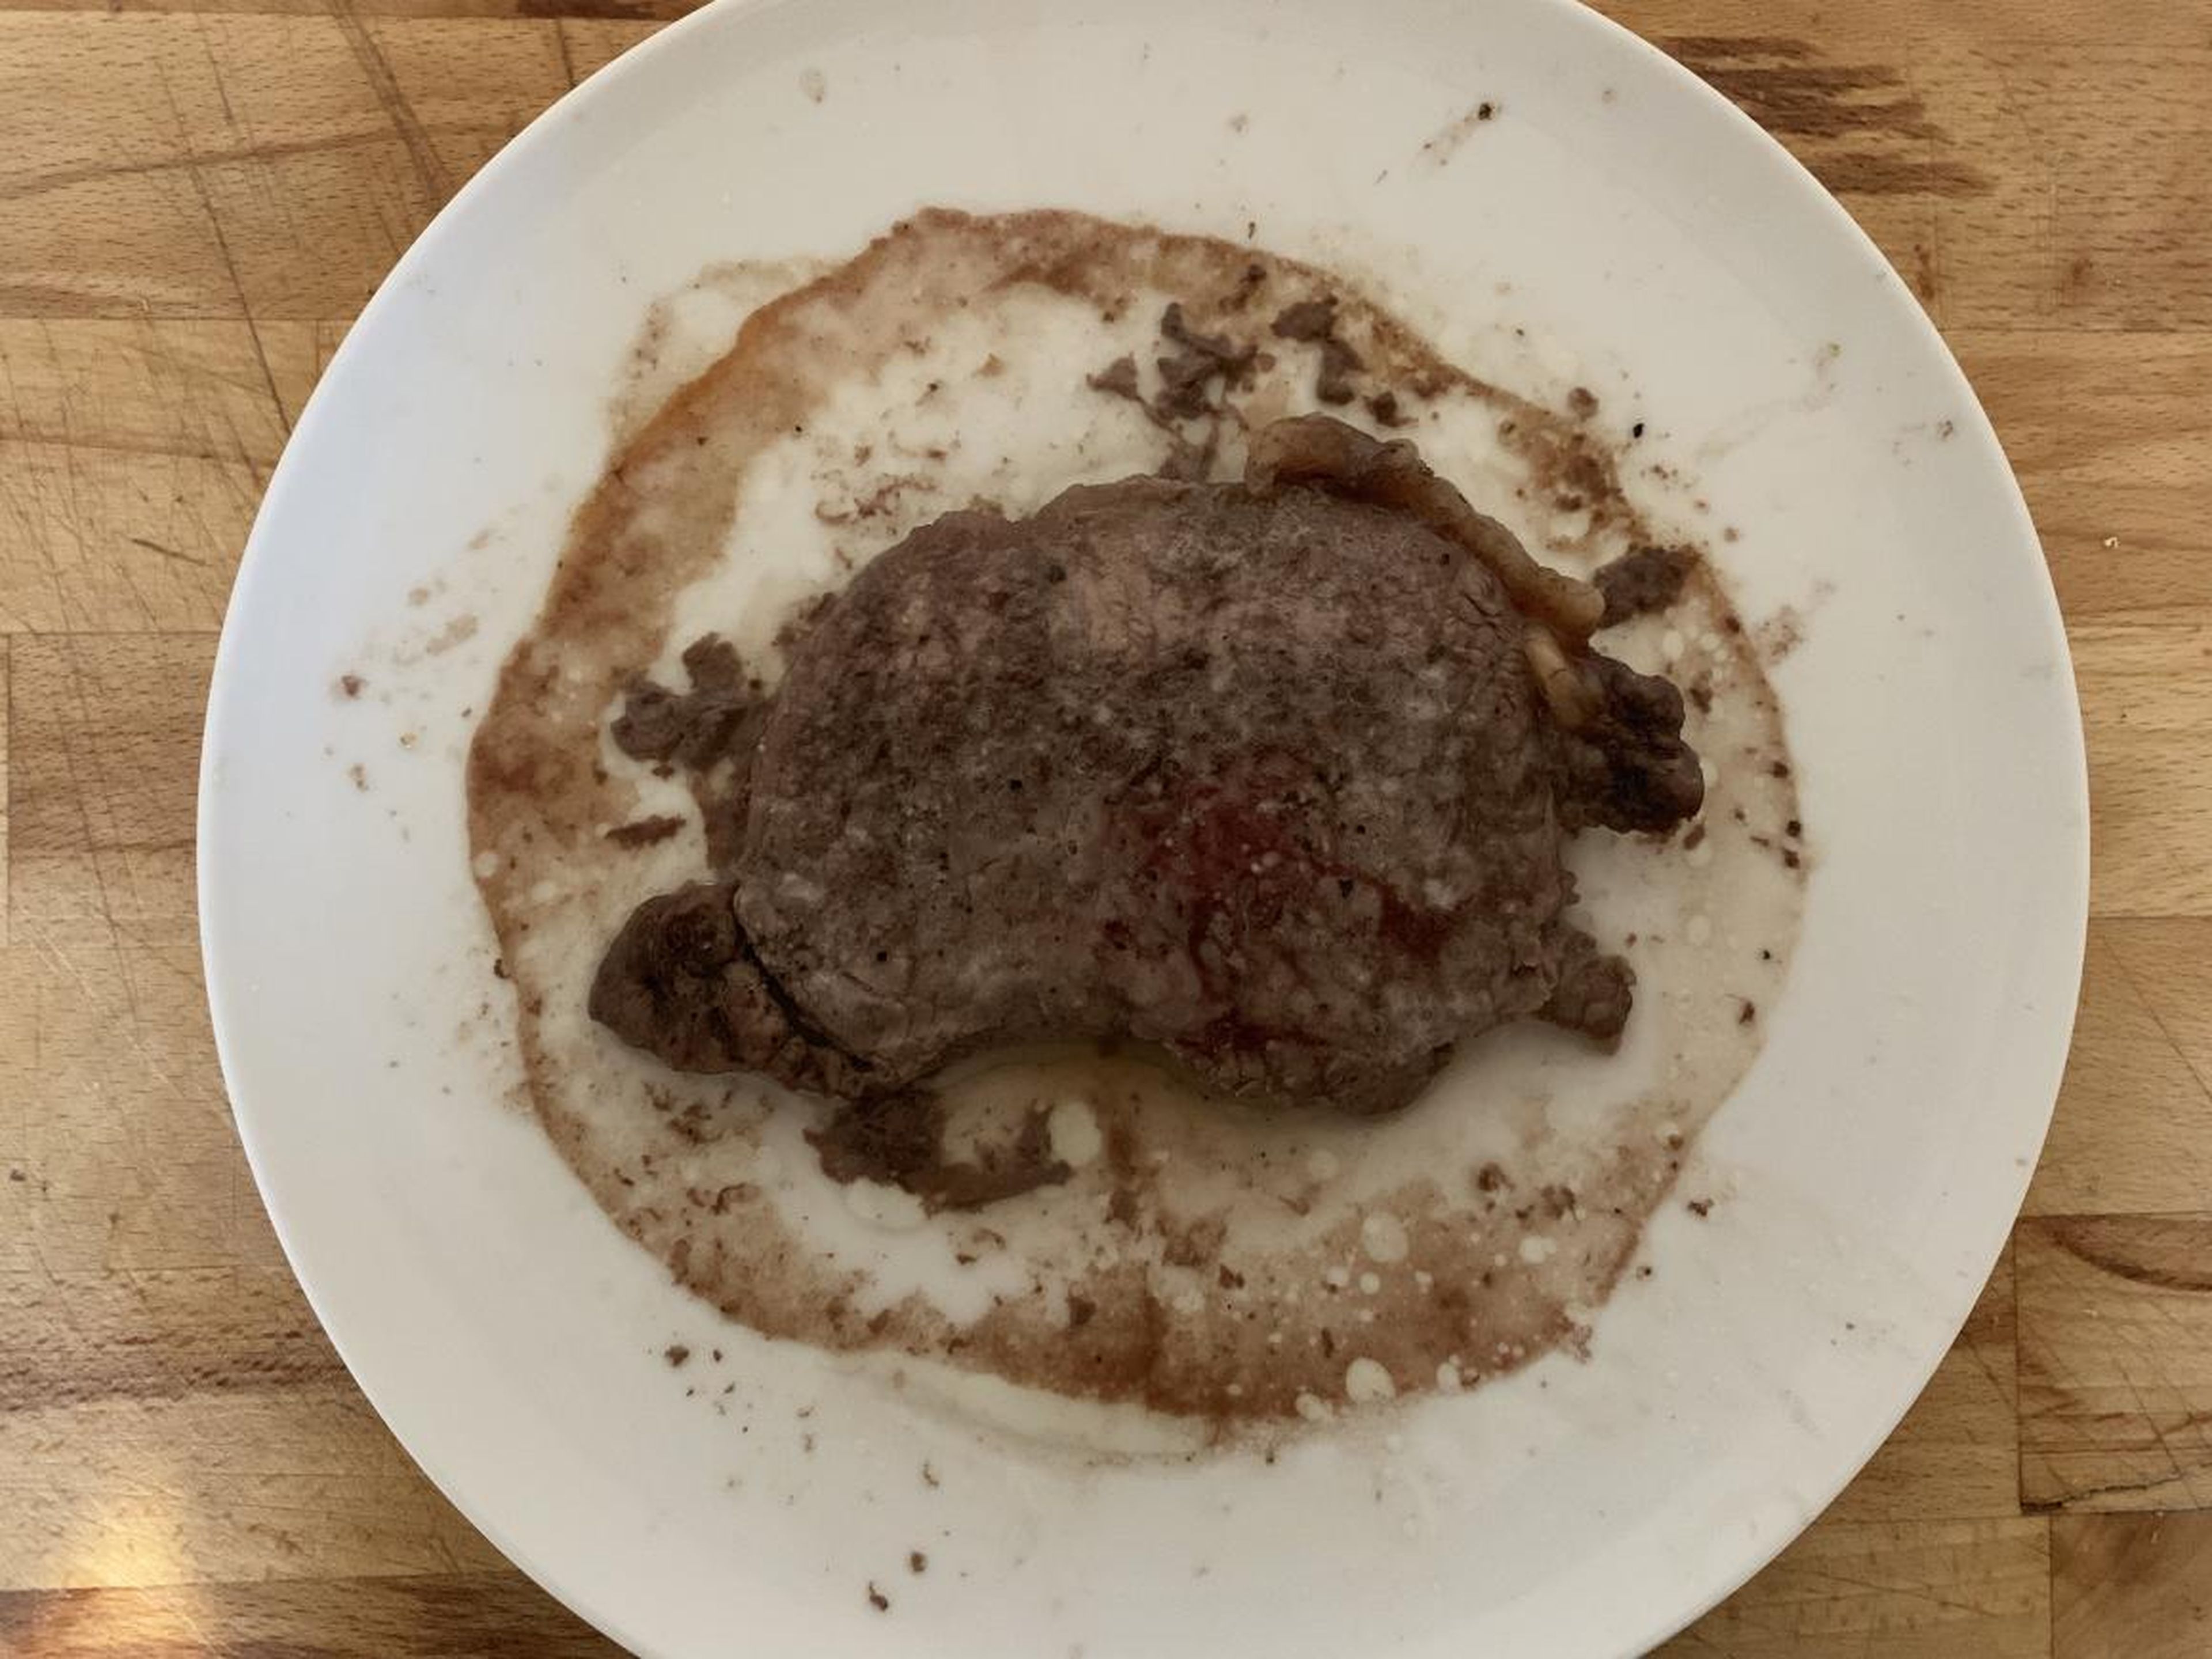 The steak emerged from the microwave after 5 minutes of cooking and looked like a crime scene.